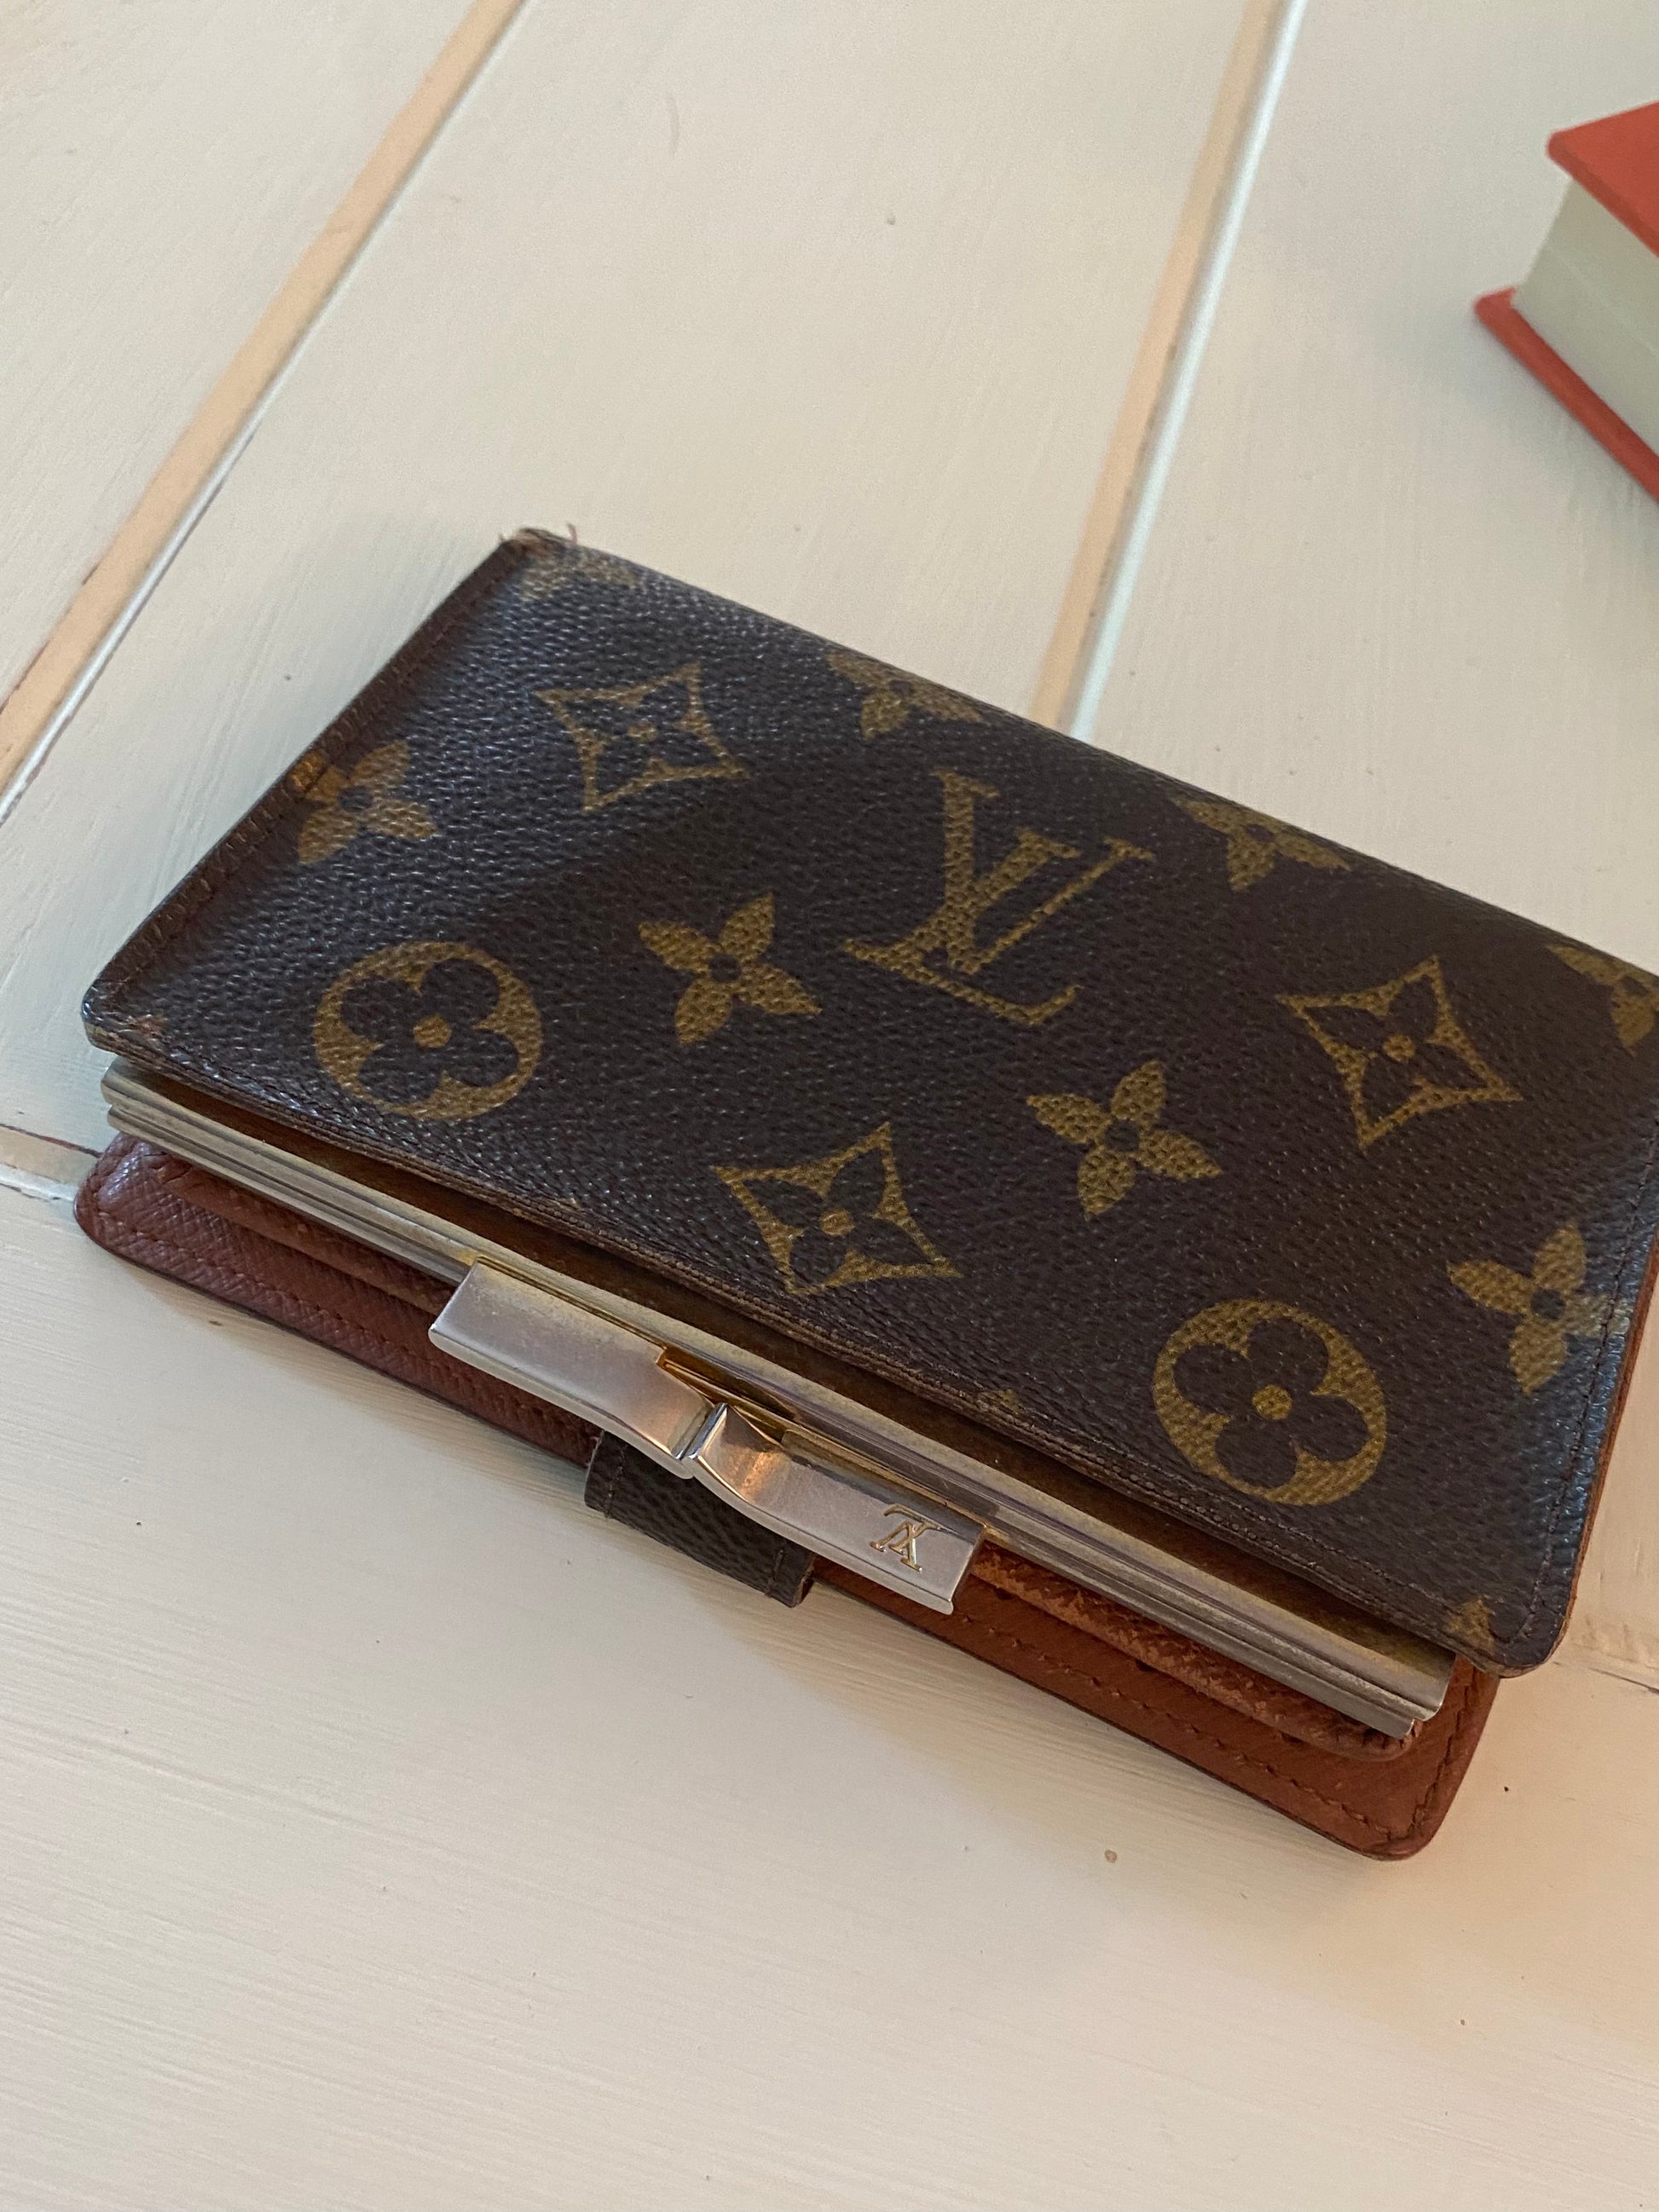 How To Tell If Your Louis Vuitton Wallet Is Real